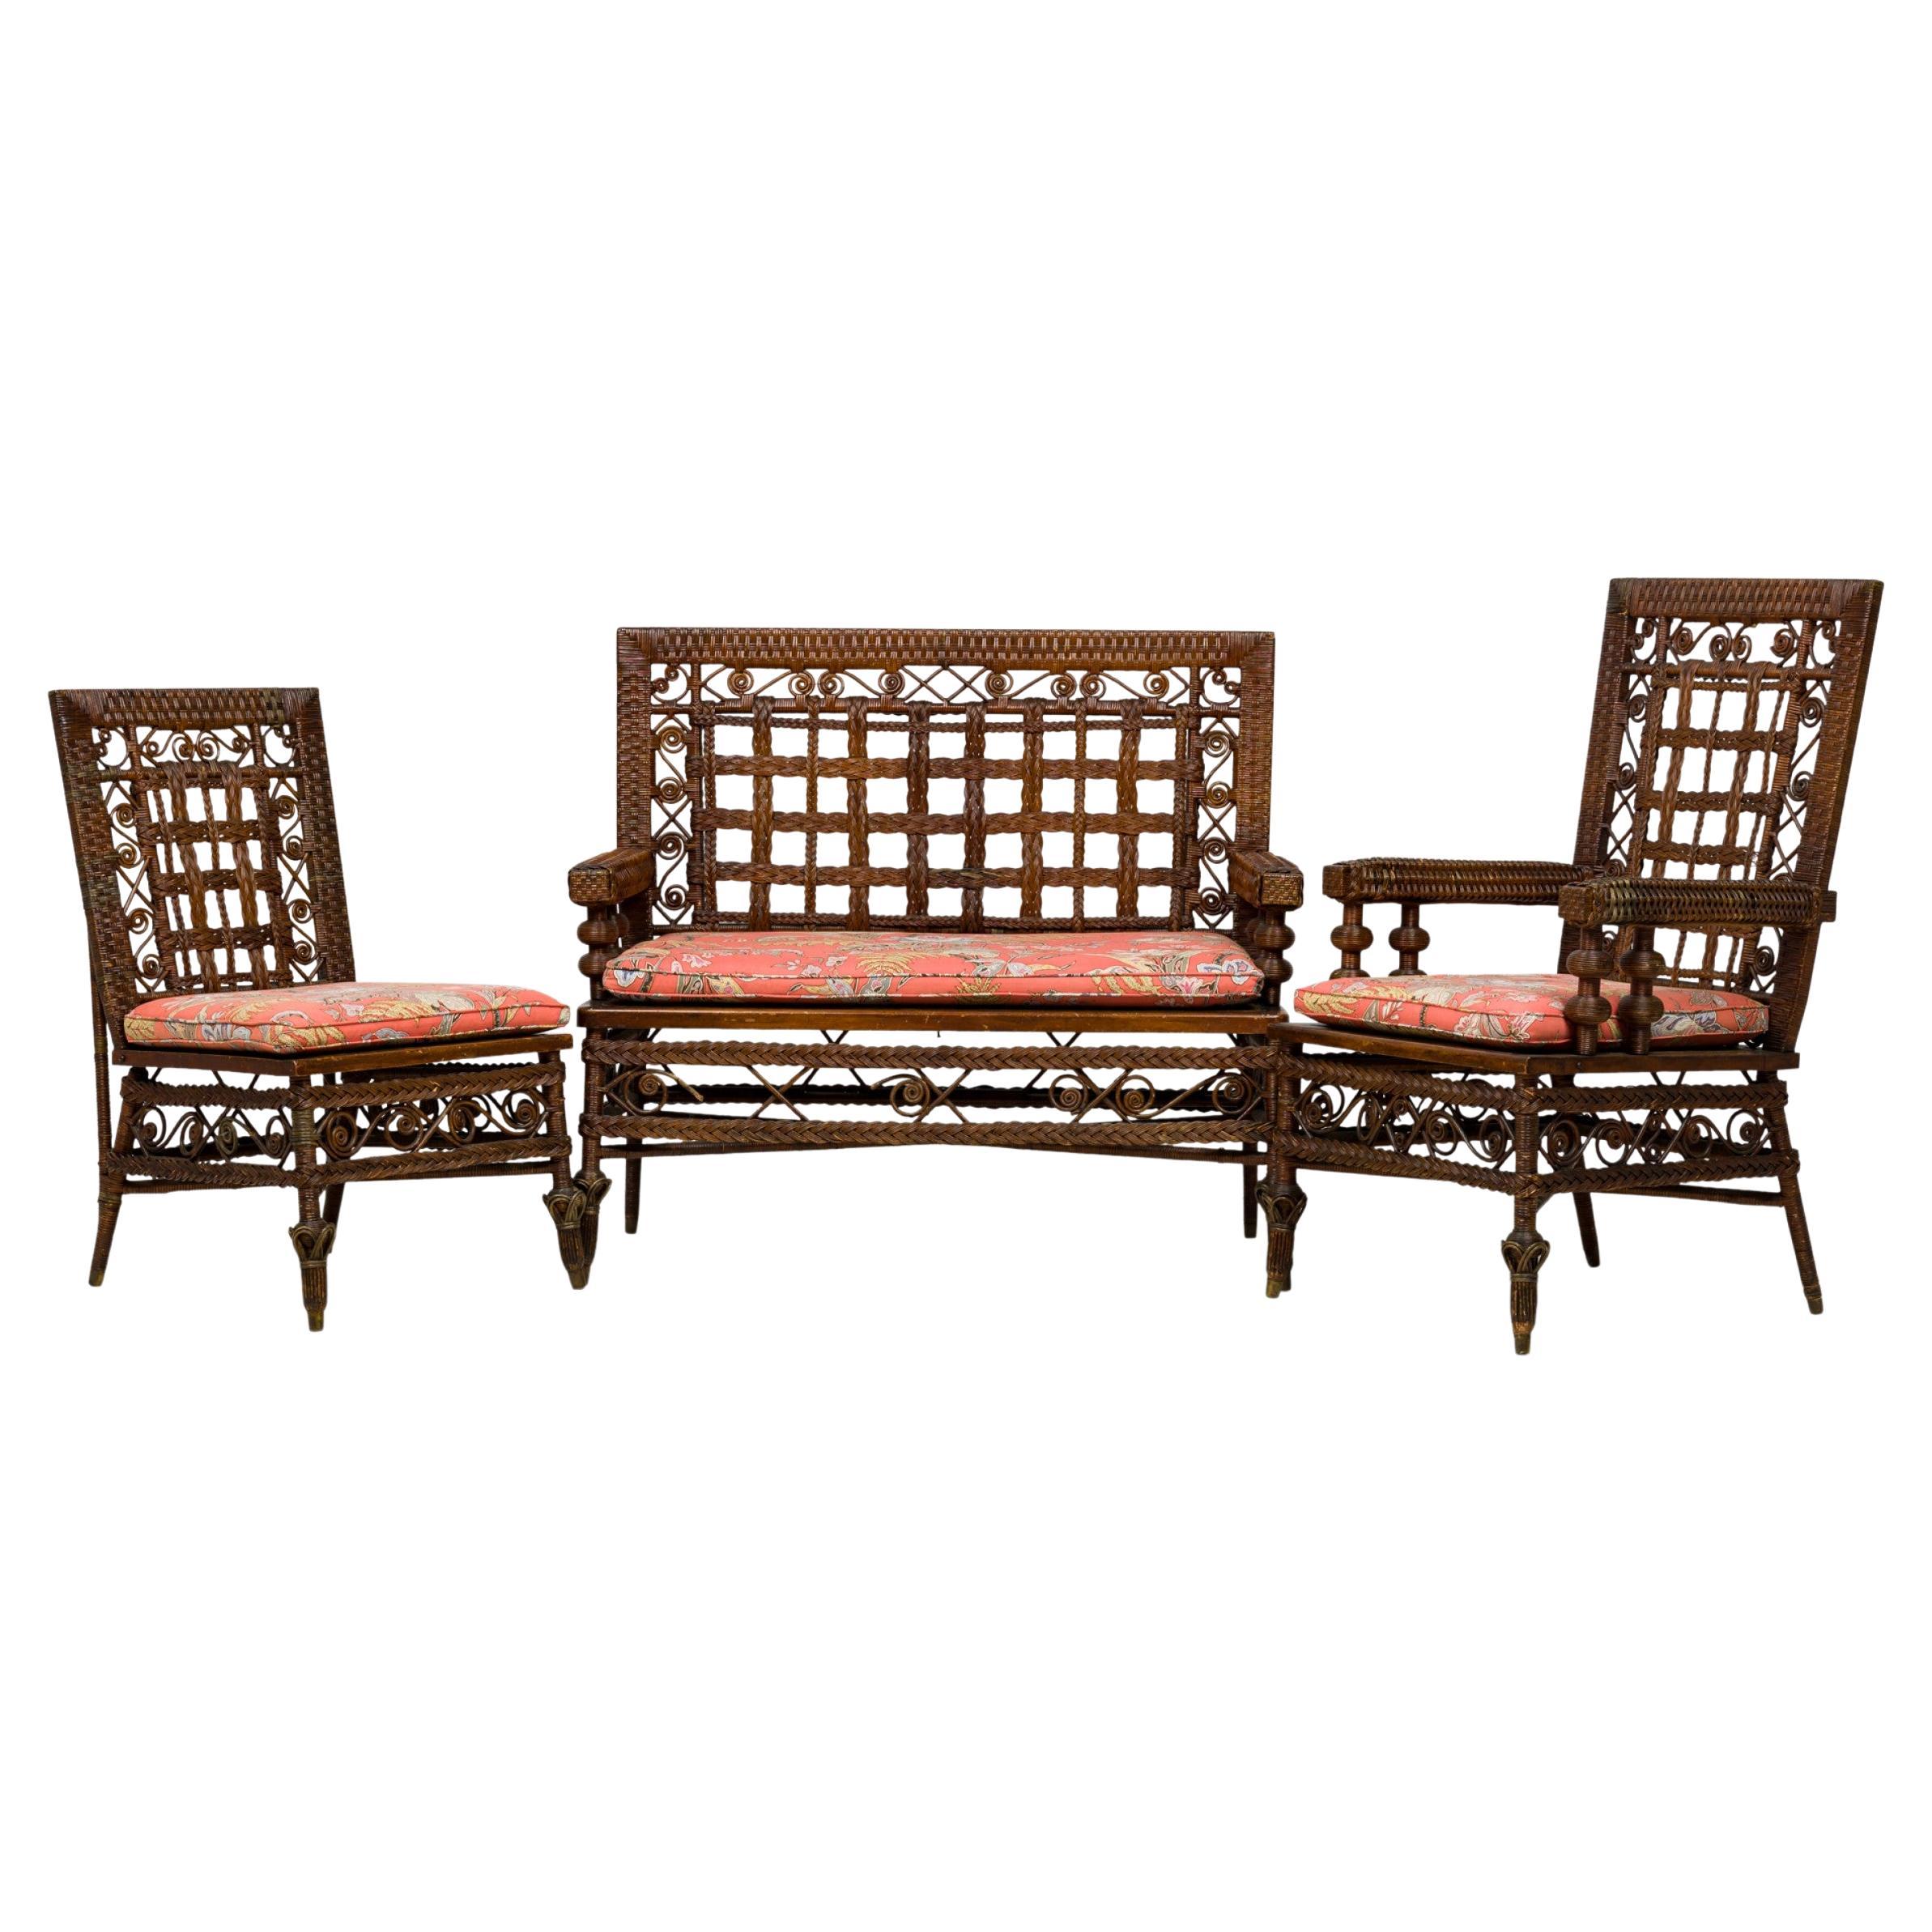 3 Piece American Victorian Braided Wicker Scroll and Lattice Design Seating Set 